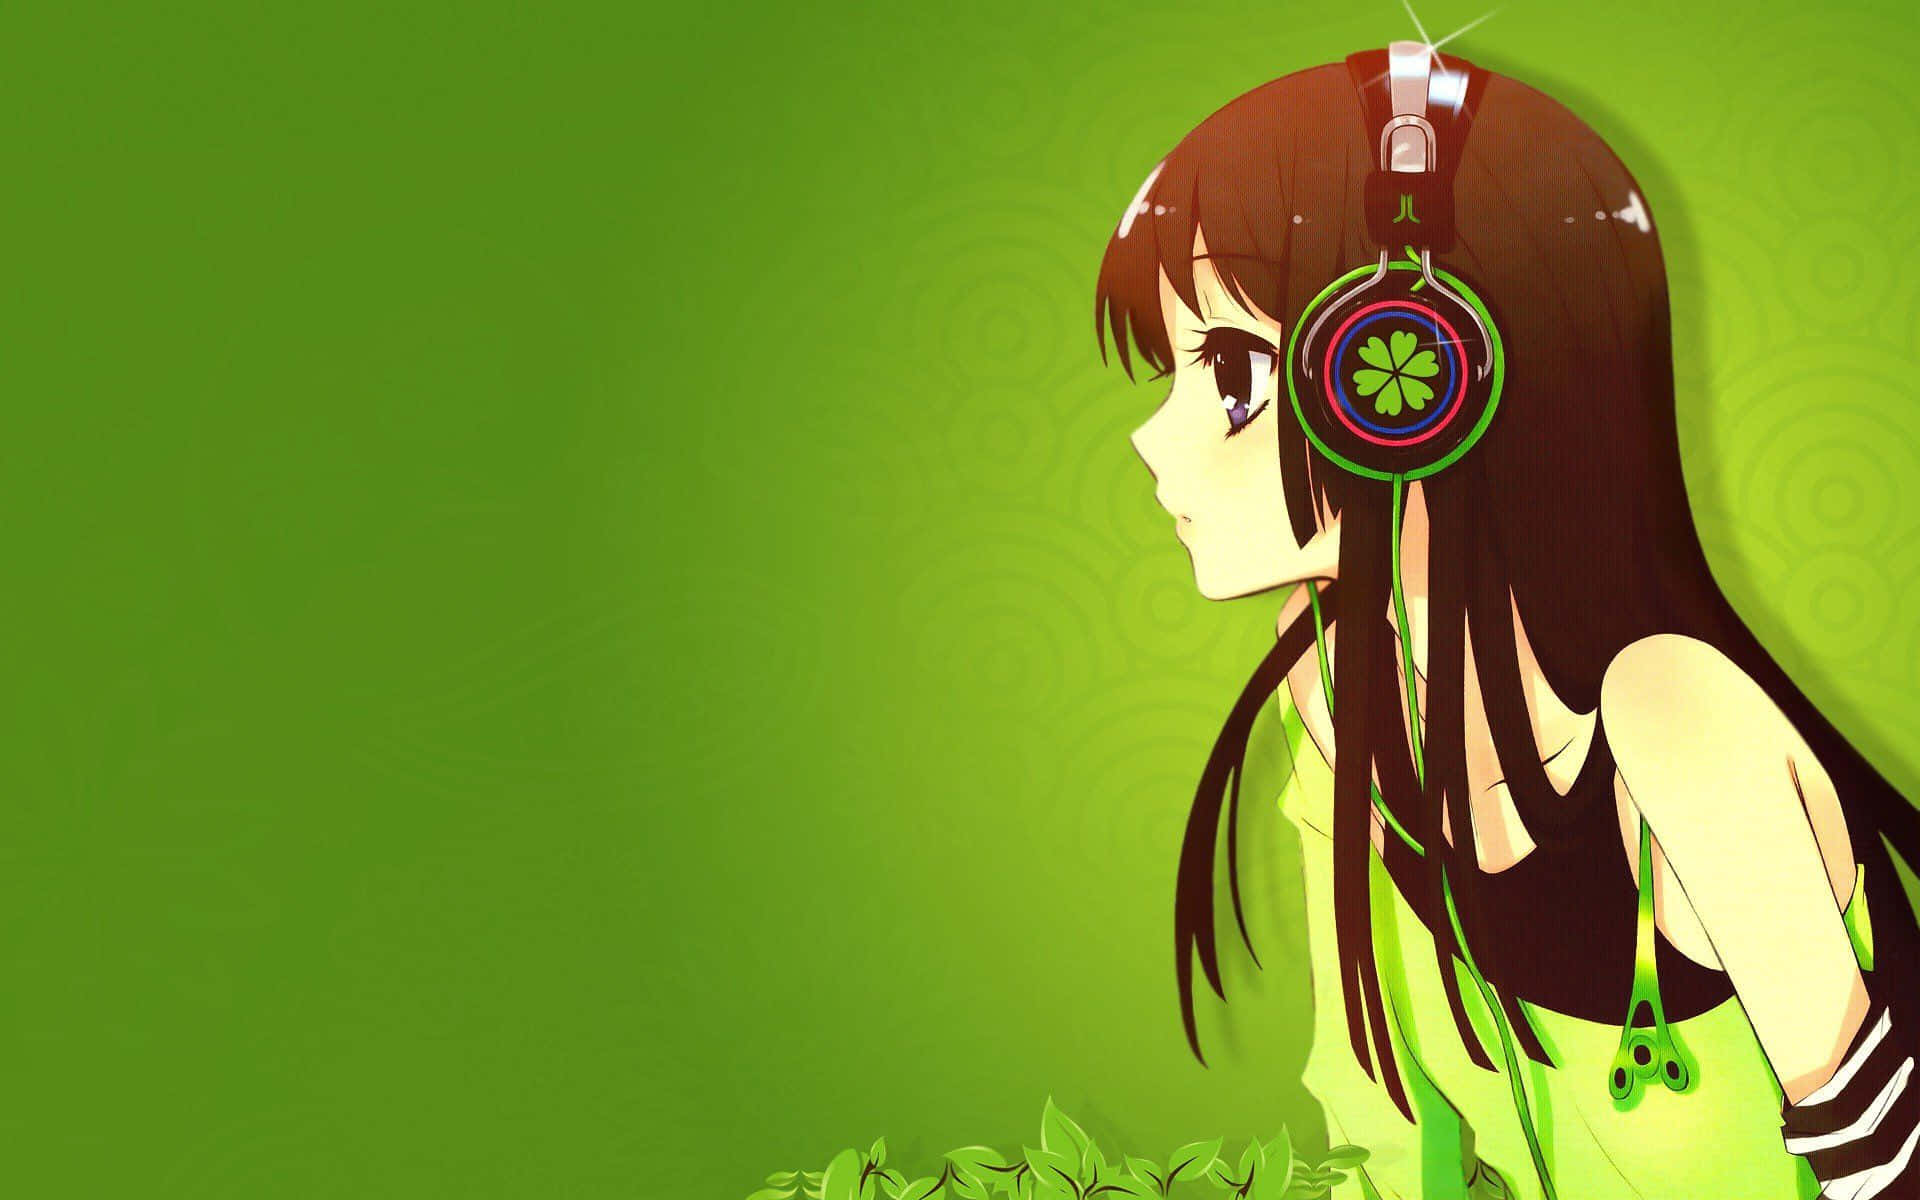 A Girl With Headphones On Is Sitting In Front Of A Green Background Wallpaper